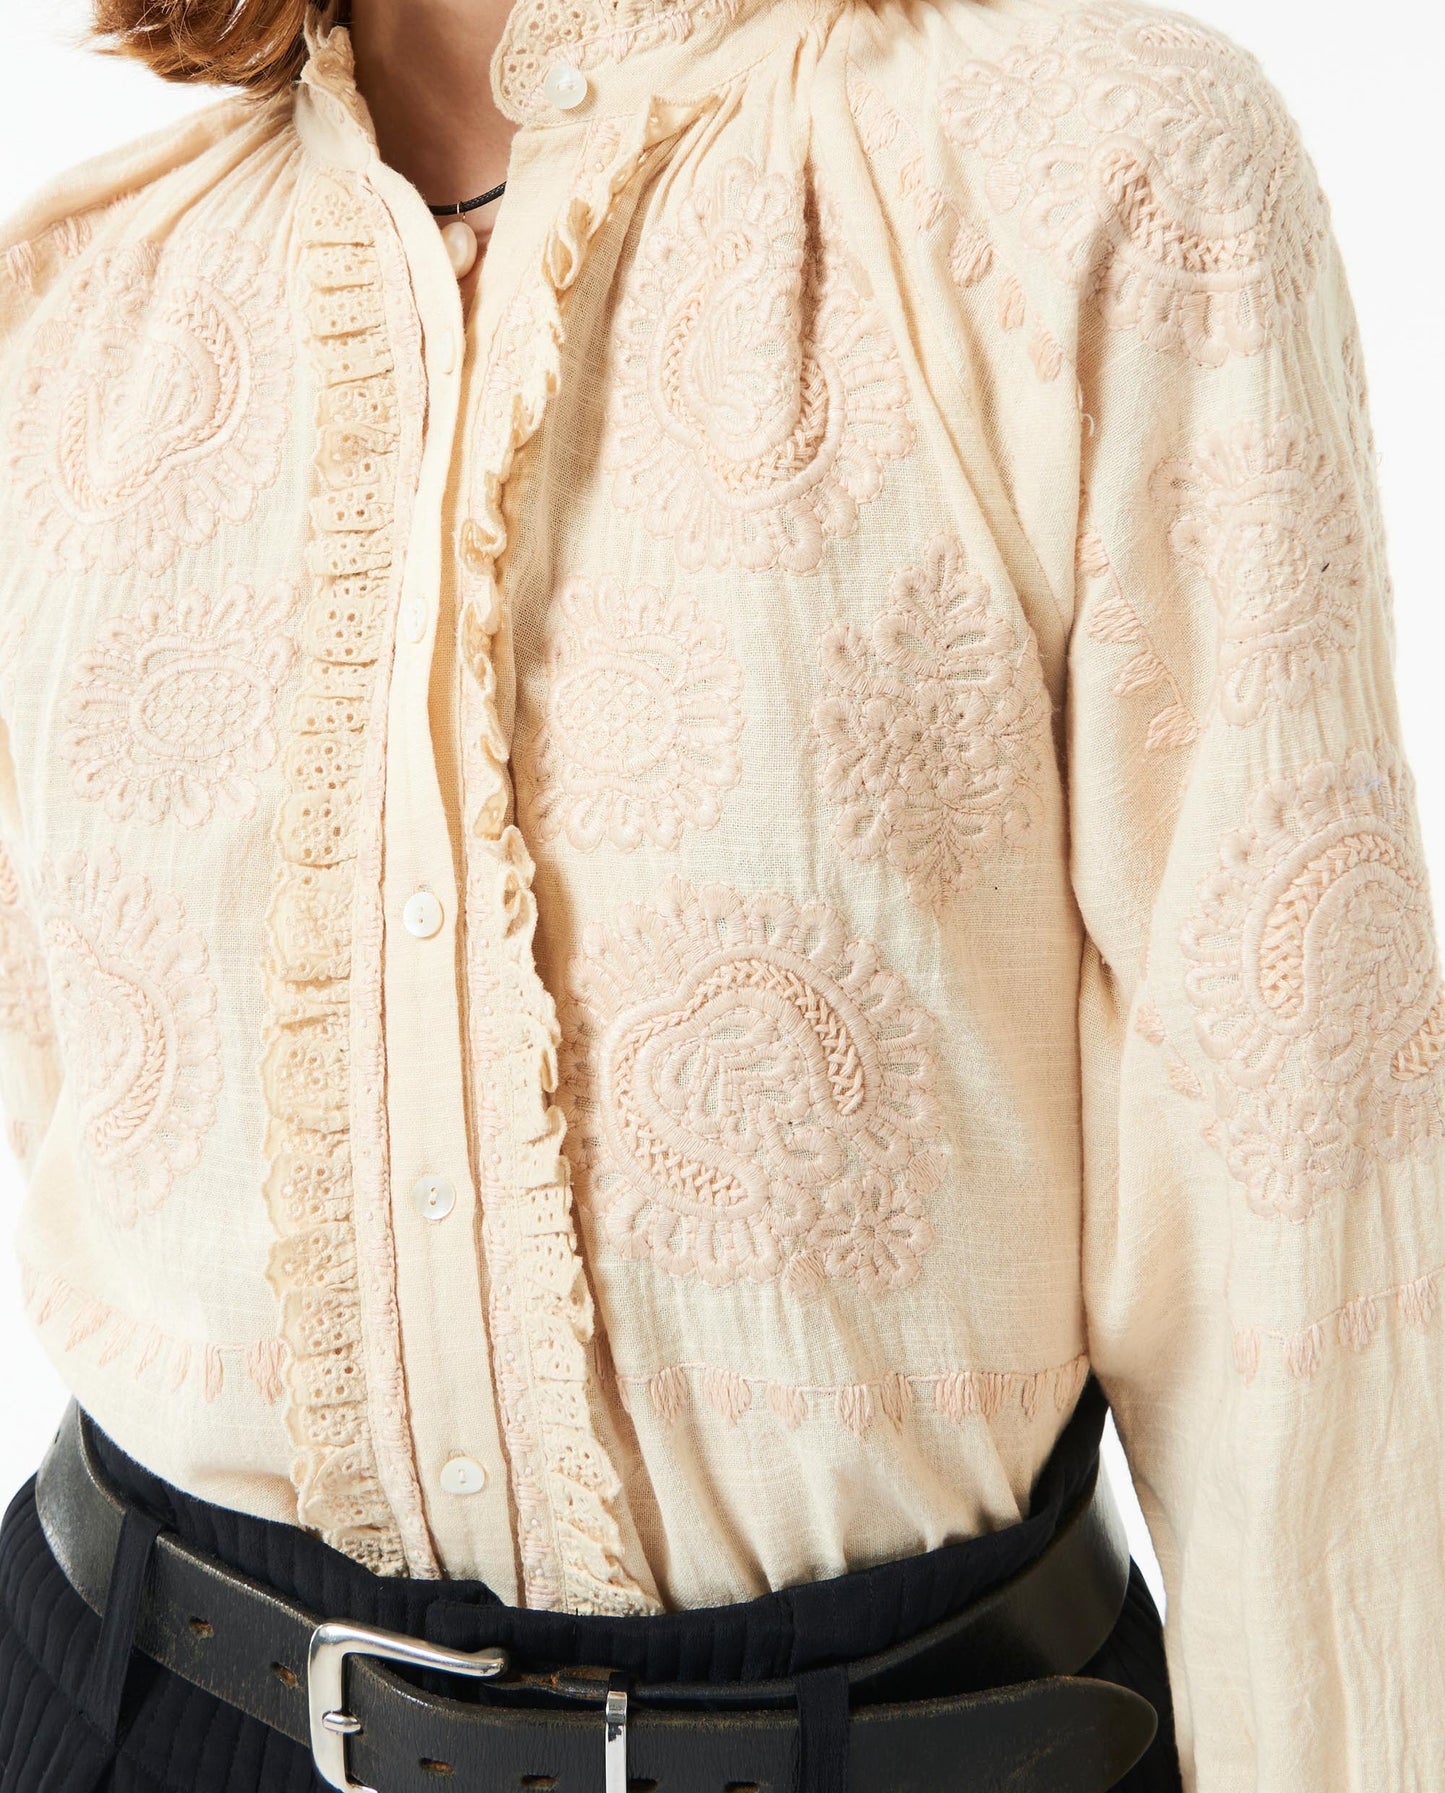 Toga embroidered blouse